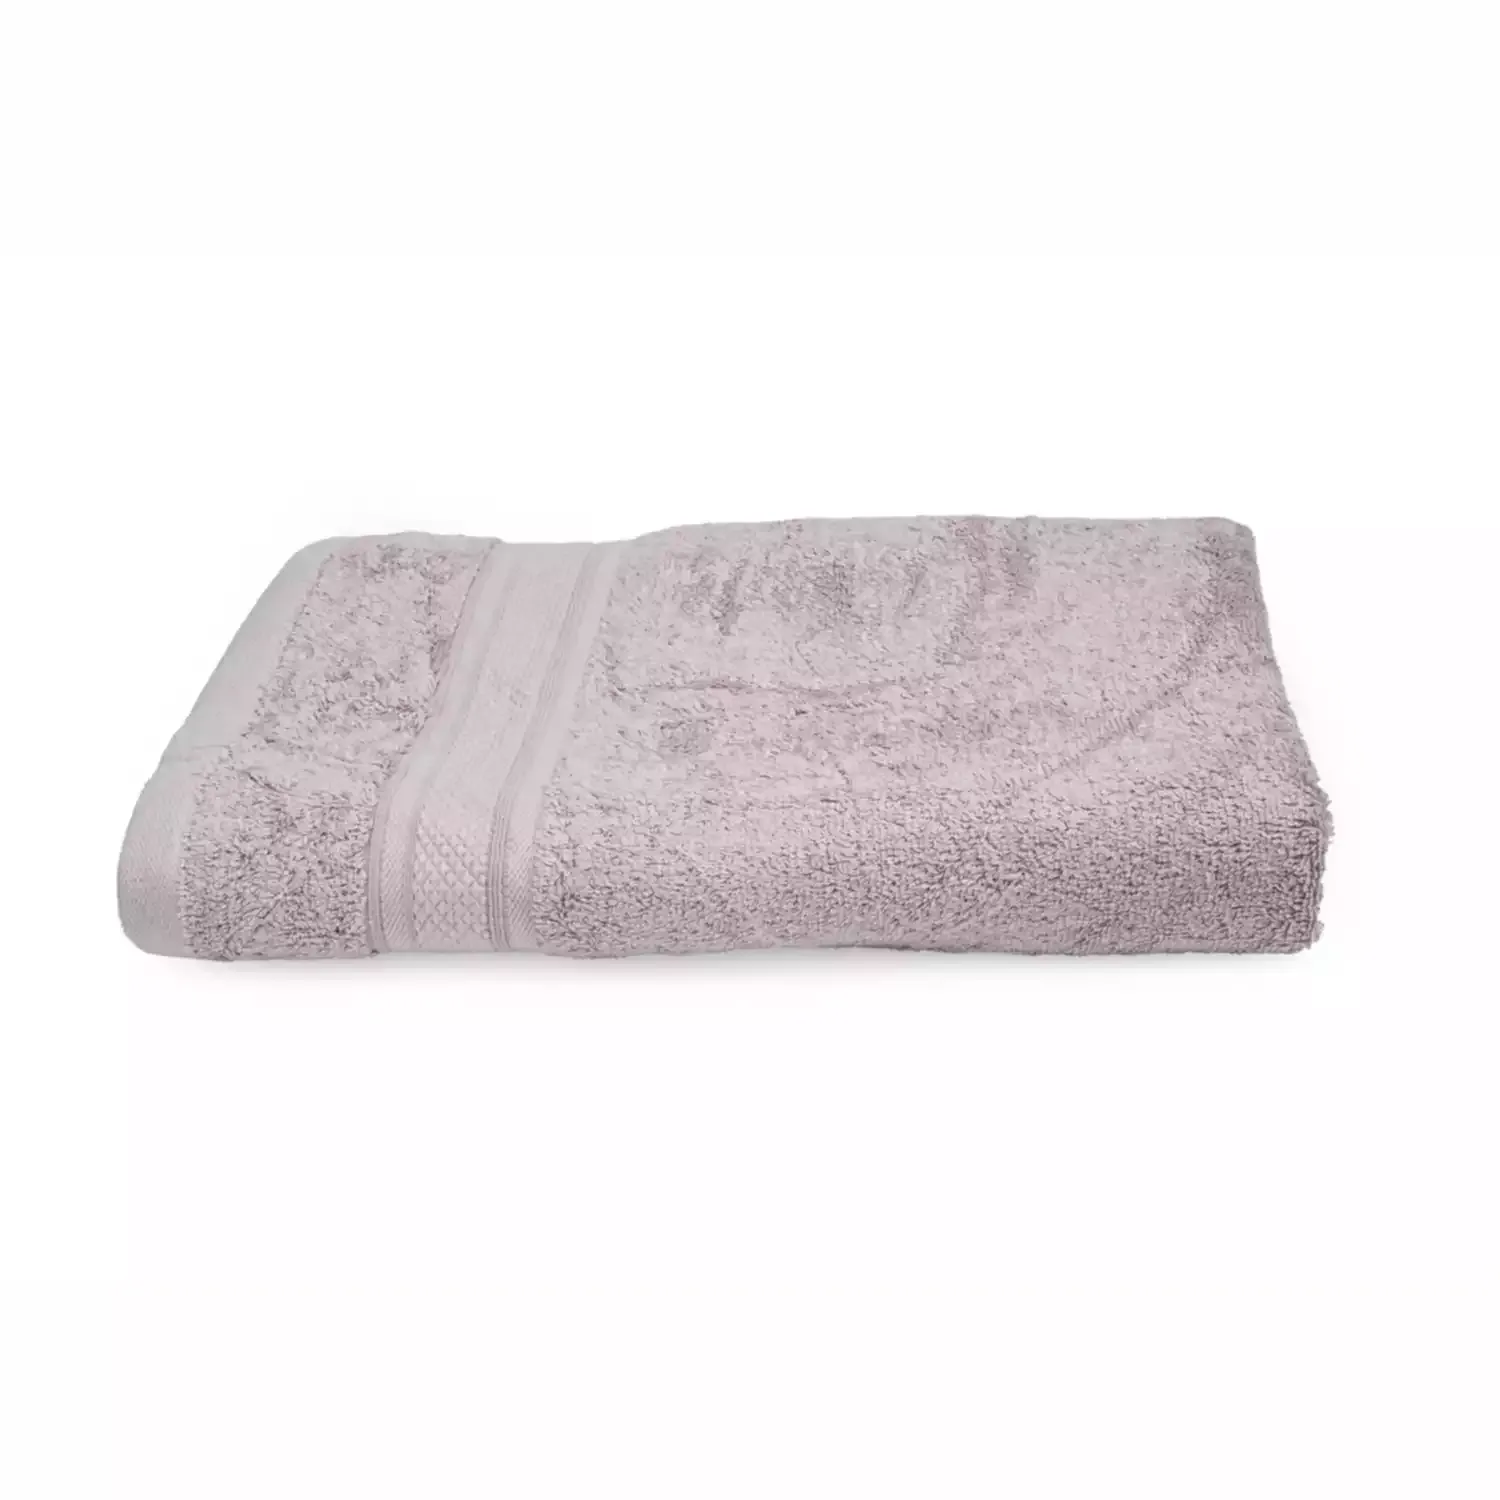 DVAAR - THE KARIRA COLLECTION - GRAPE GREY BAMBOO HAND TOWEL COMBO PACK OF TWO ECO FRIENDLY TOWEL 600 GSM